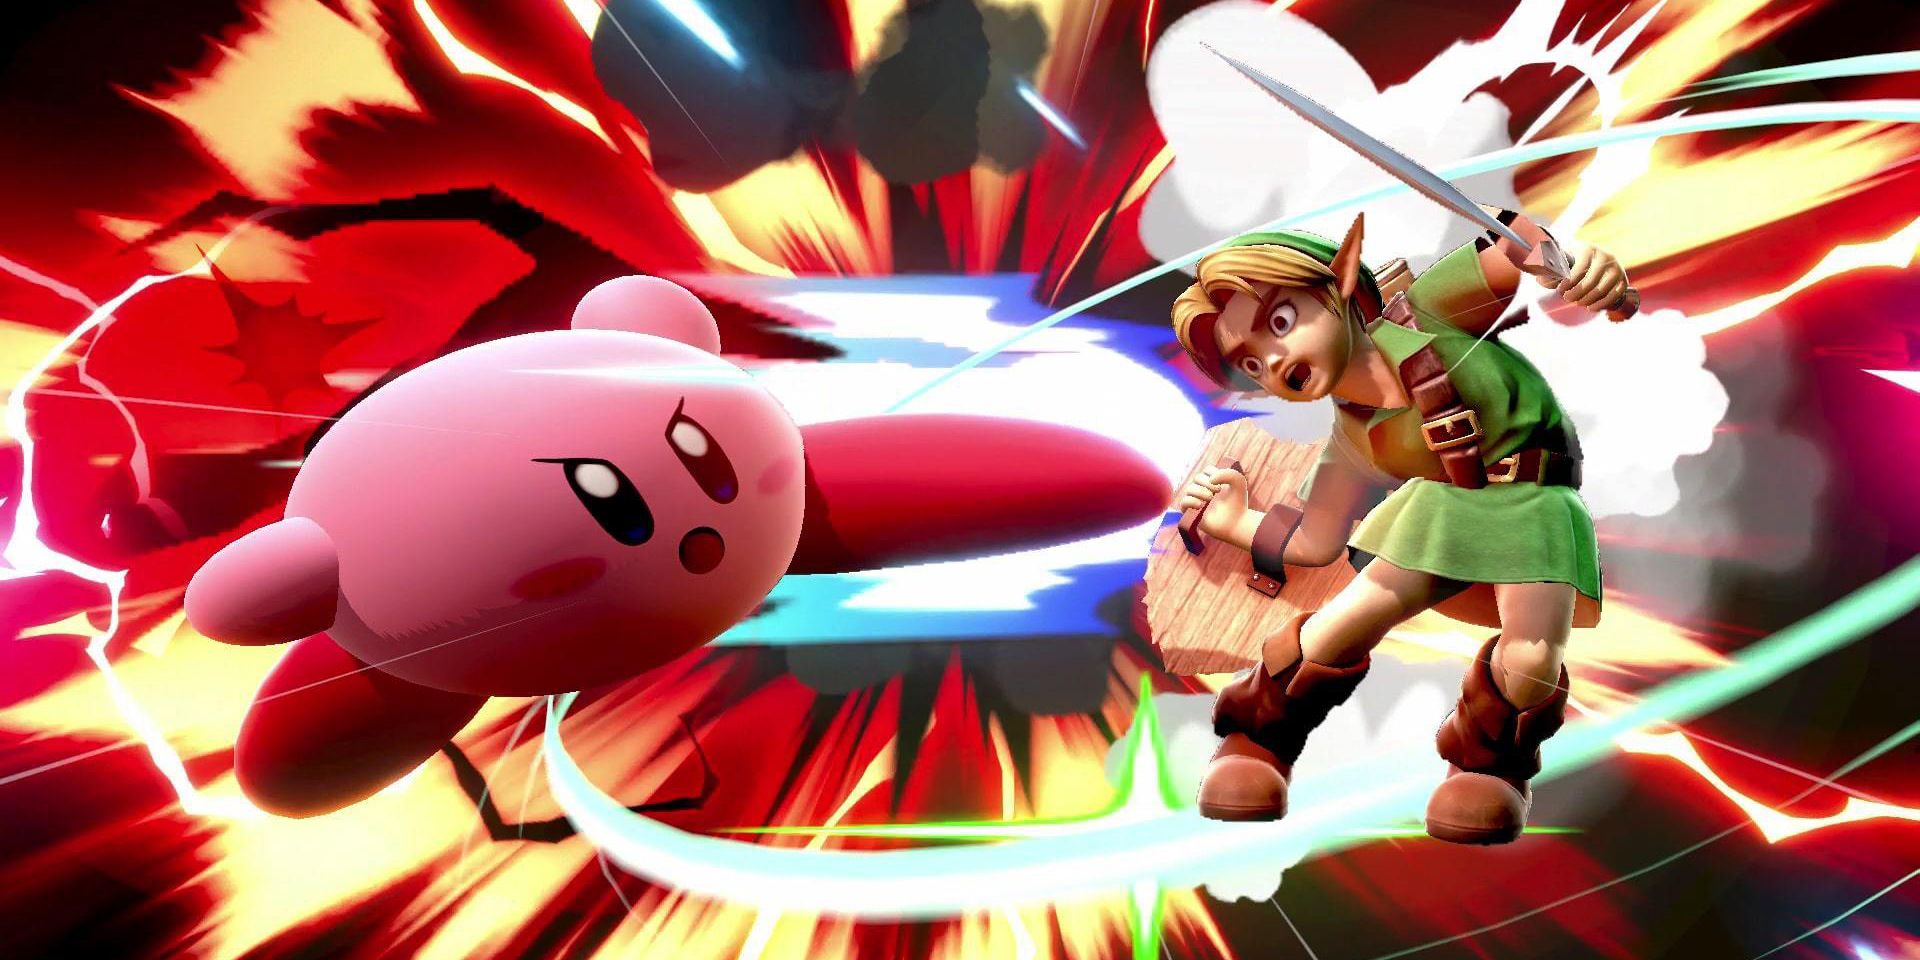 Kirby and Link in Smash brothers